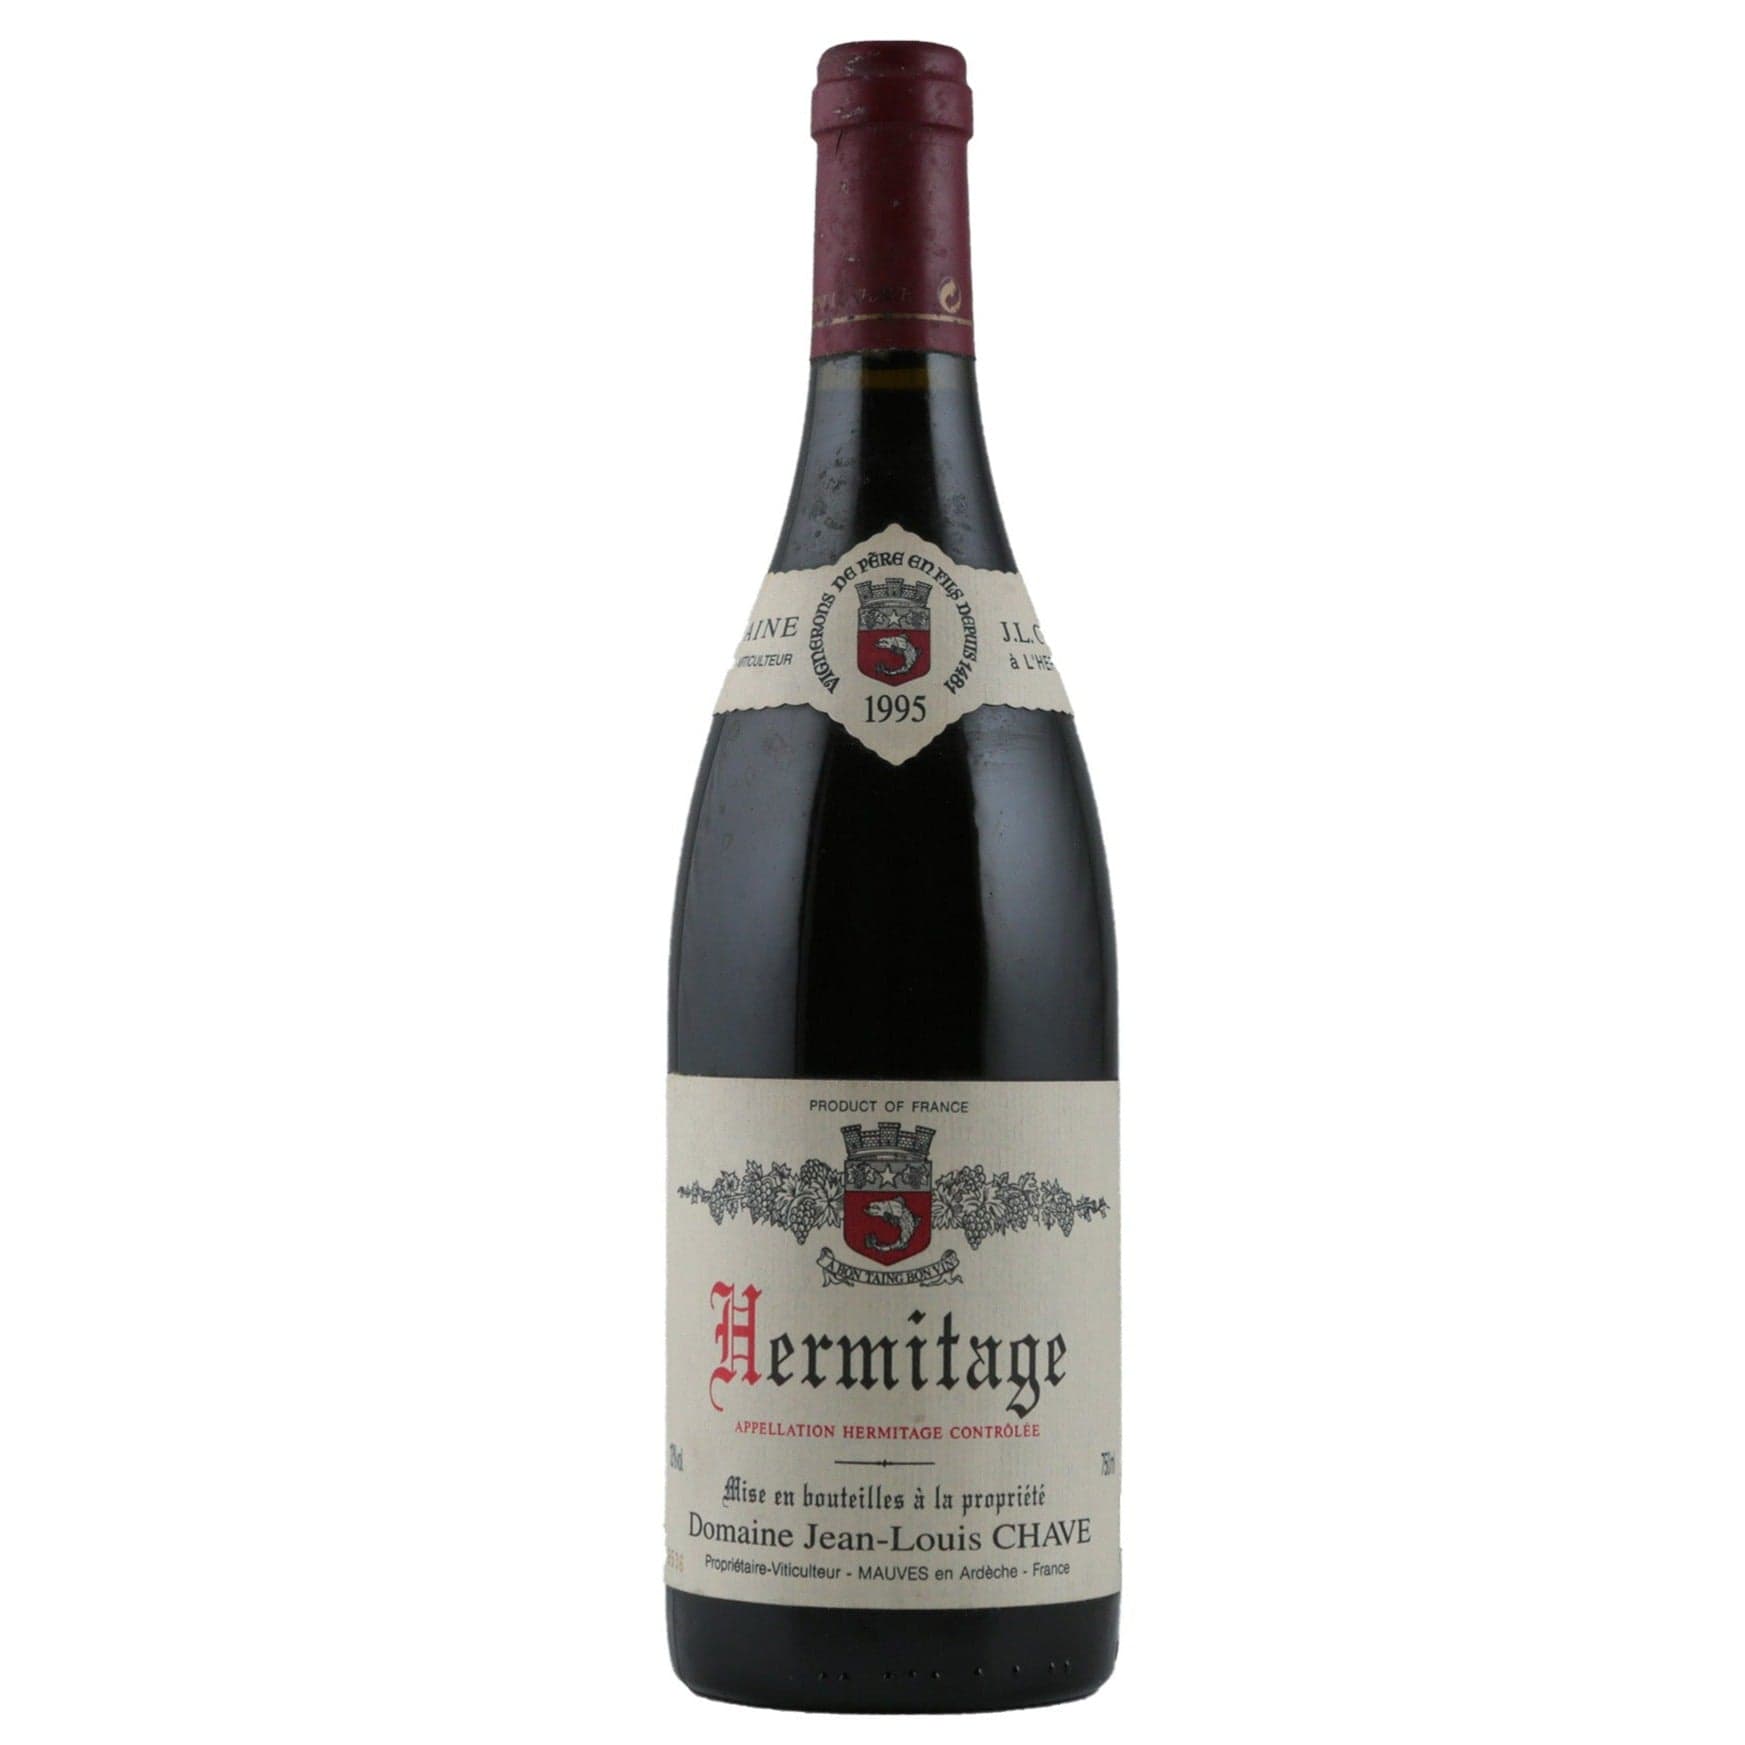 Single bottle of Red wine Dom. Jean-Louis Chave, Hermitage, 1995 100% Syrah